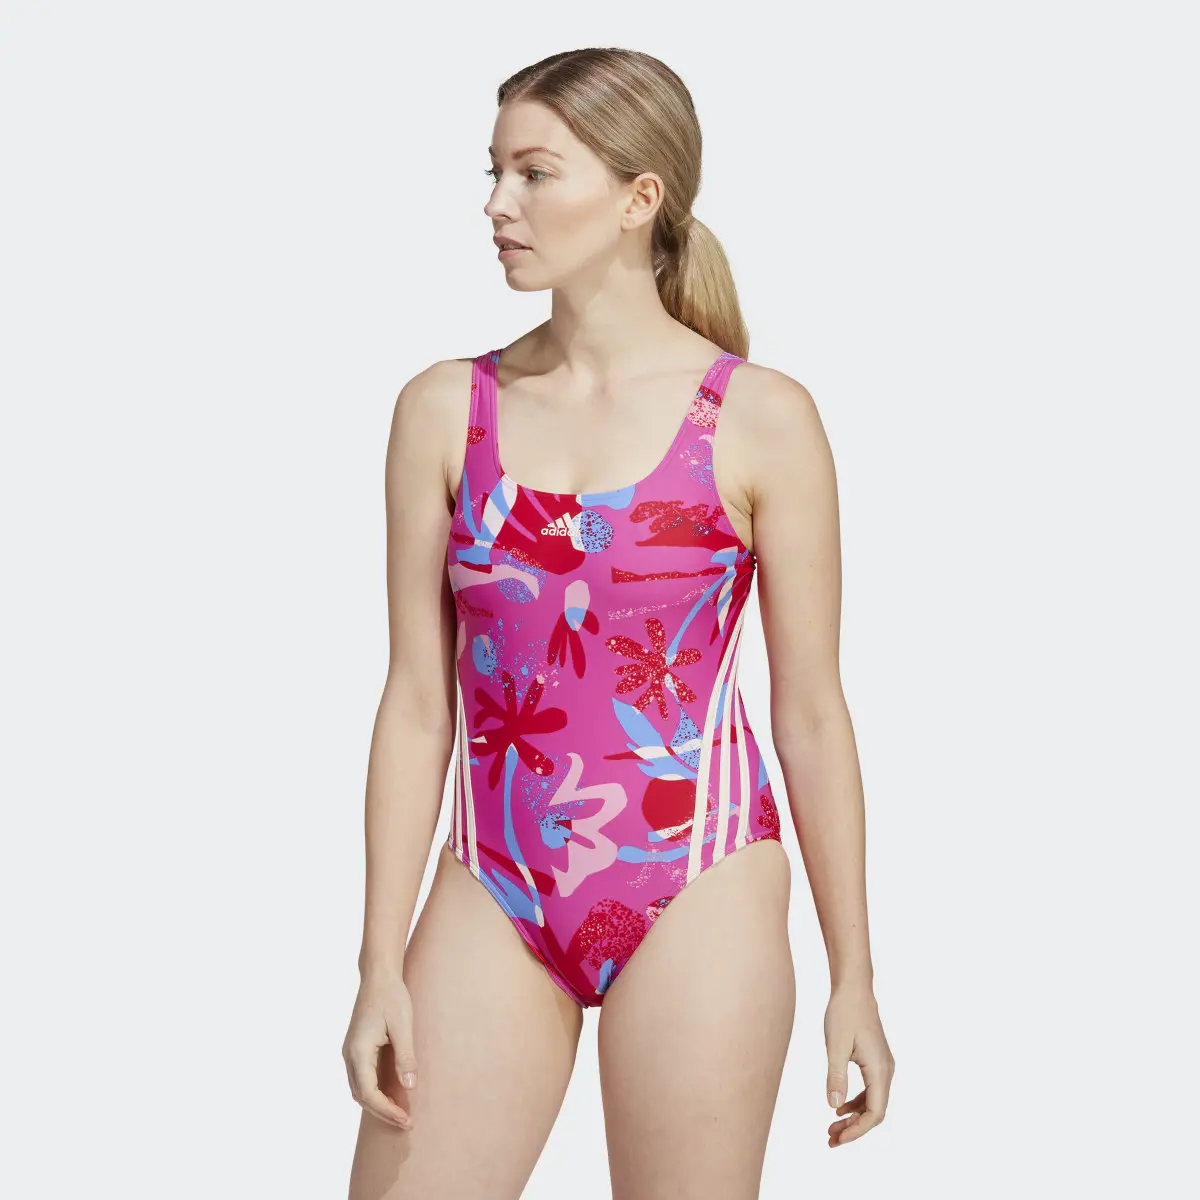 Adidas Floral 3-Stripes Swimsuit. 2